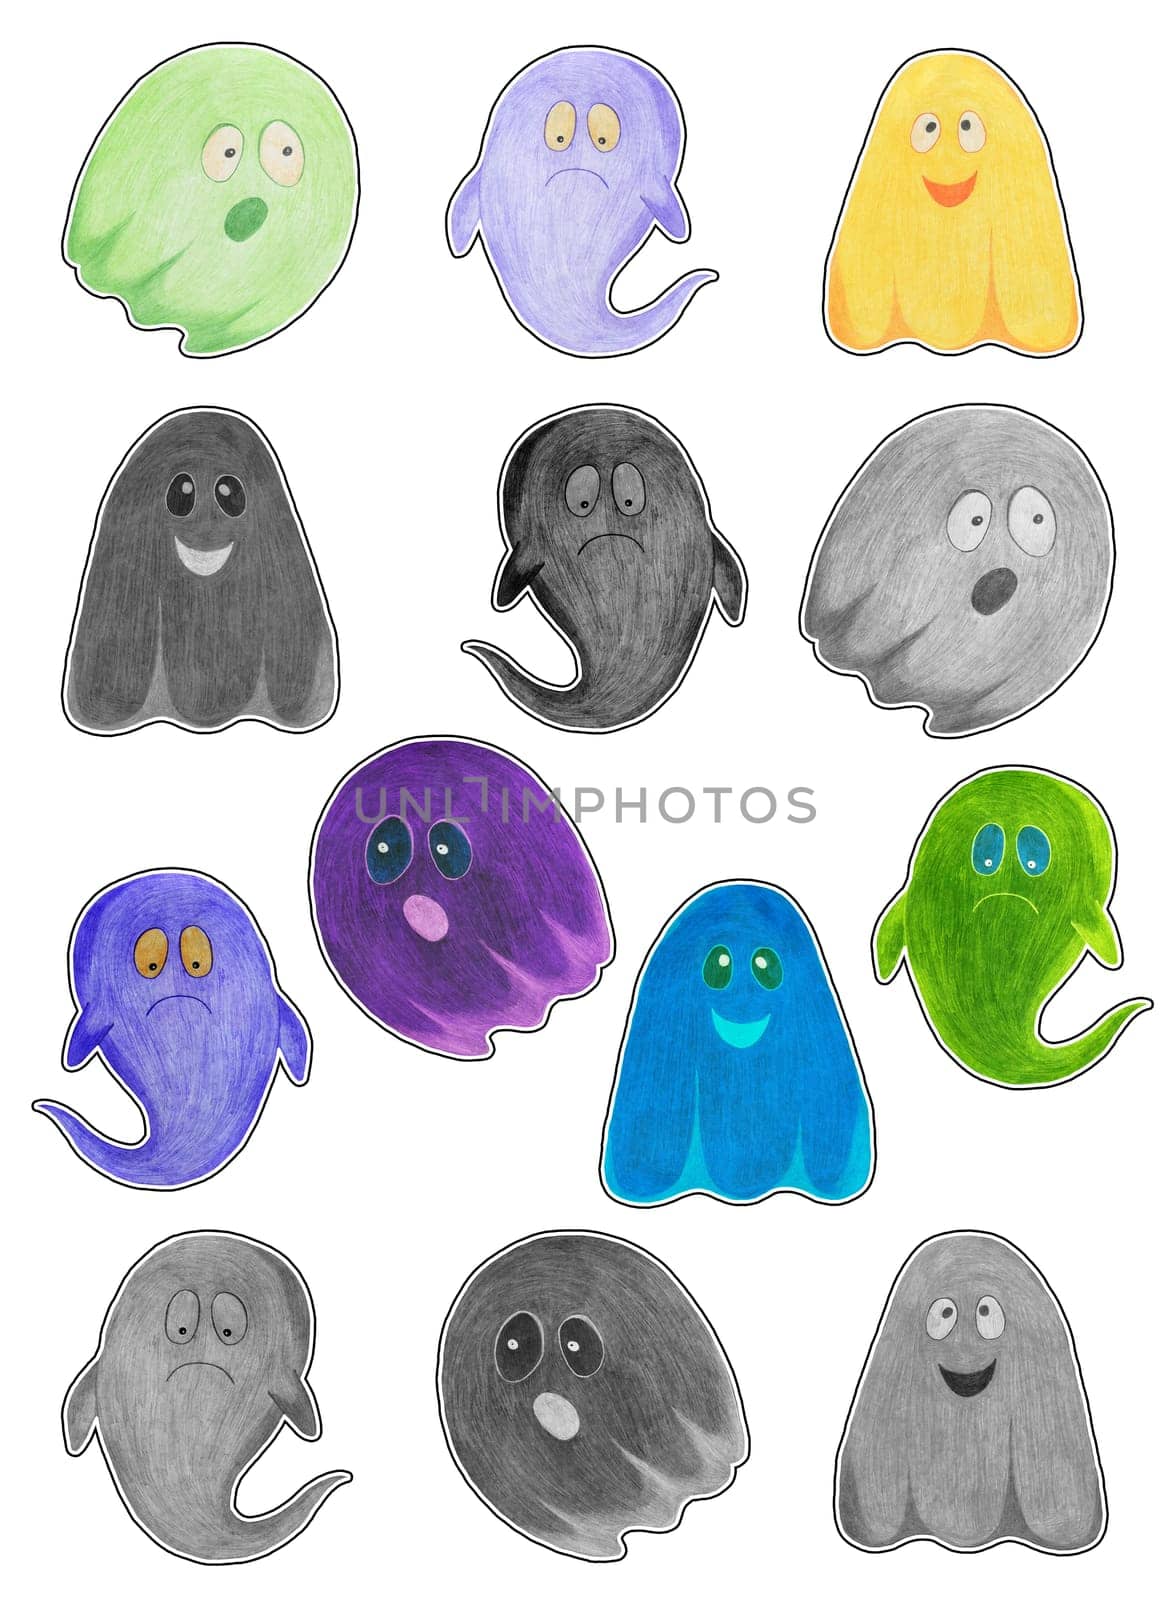 Printable Set of Hand Drawn Halloween Ghosts Sticker Pack. Halloween Scary Ghostly Monsters. Cute Cartoon Spooky Character, Drawn by Colored Pencils.